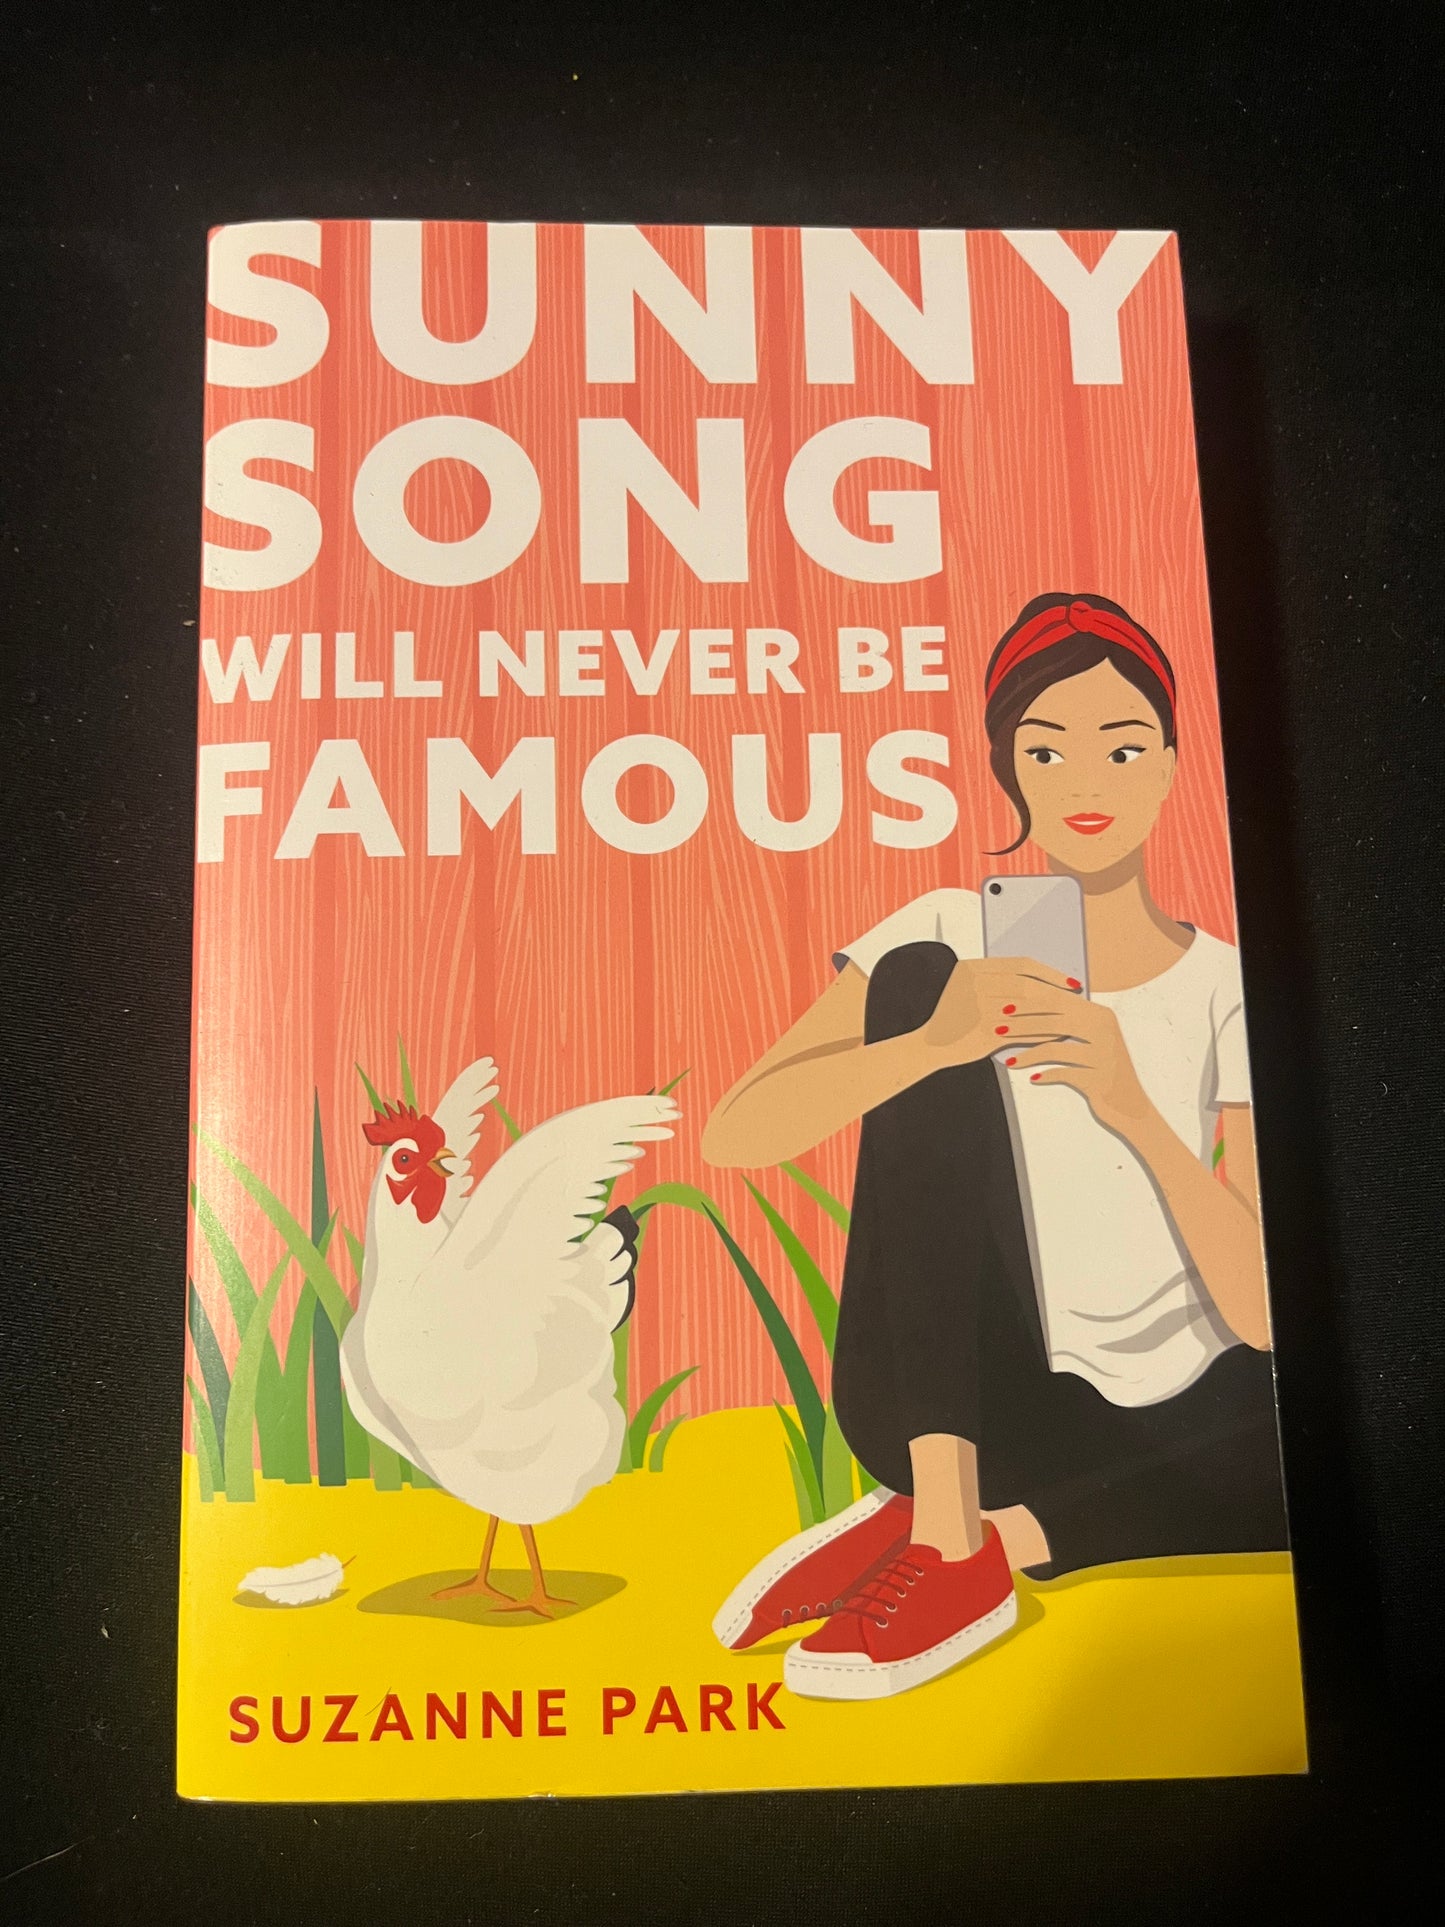 SUNNY SONG WILL NEVER BE FAMOUS by Suzanne Park